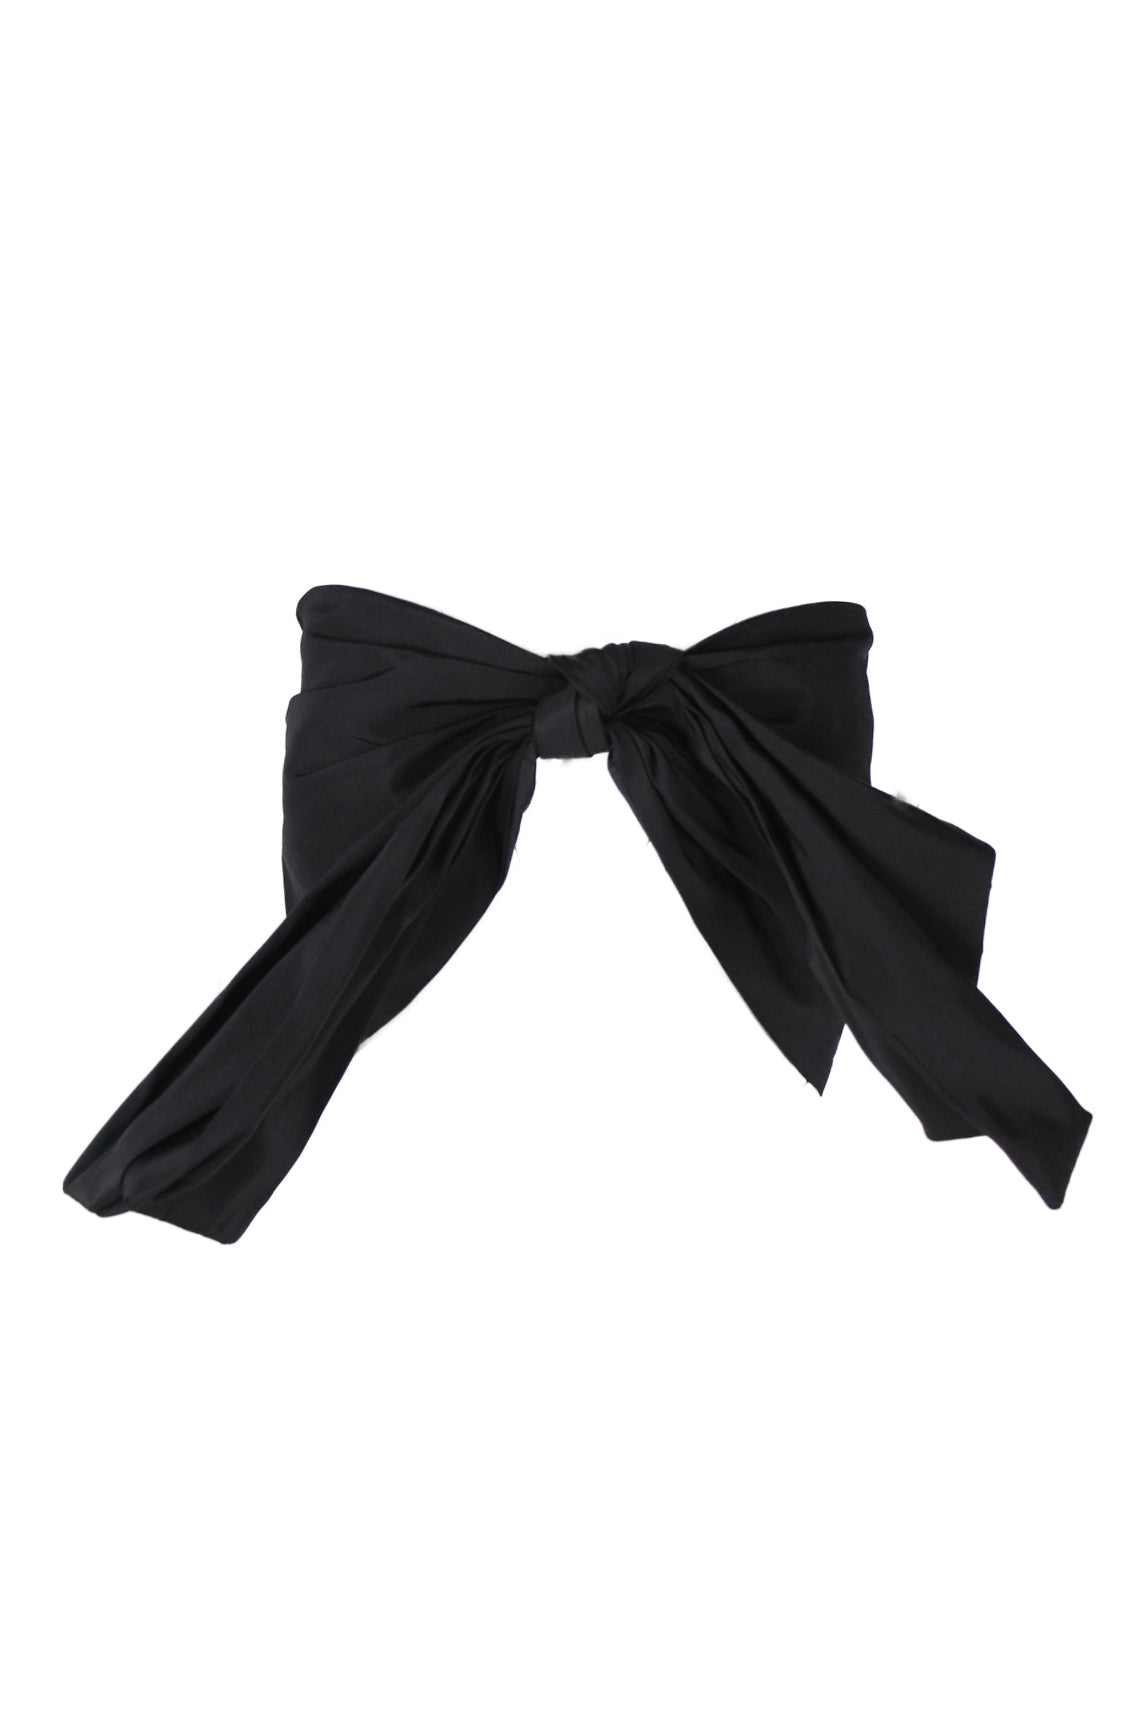 description: lurelly bow silk taffeta black top. features zipper closure at center back, fully lined, strapless, and bow detailing at front. 